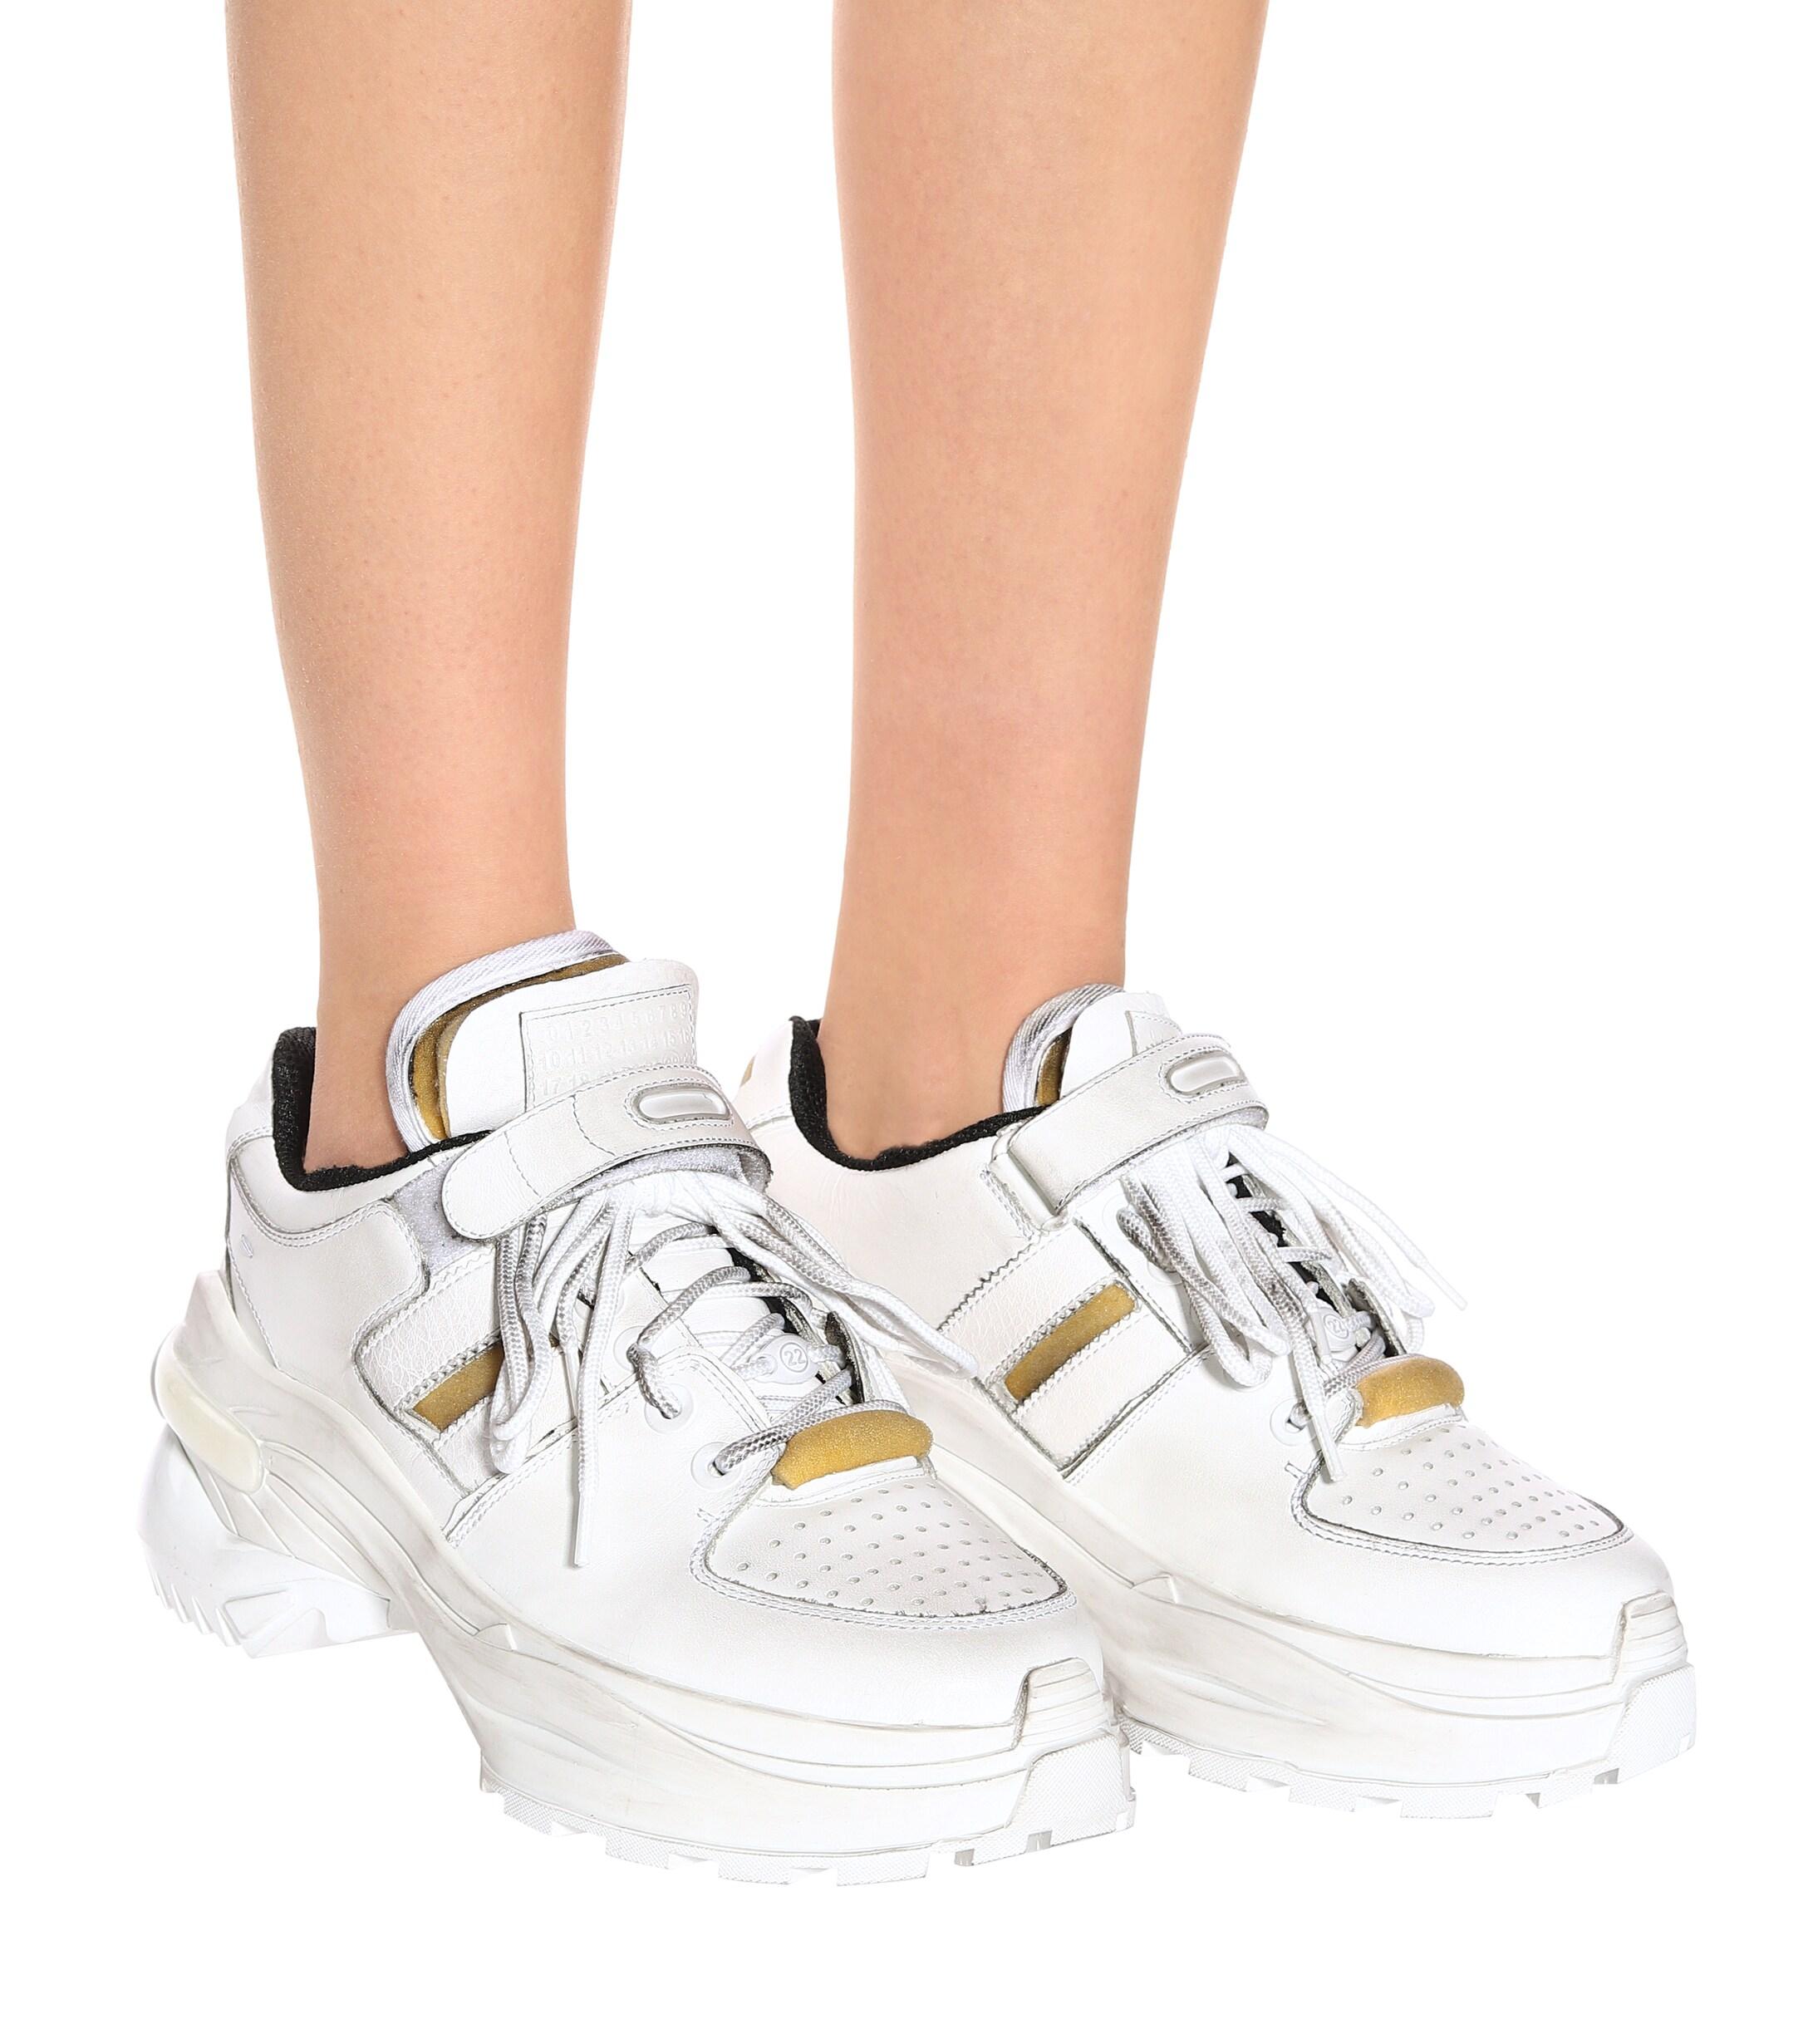 Maison Margiela Retro Fit Leather Sneakers in White | Lyst